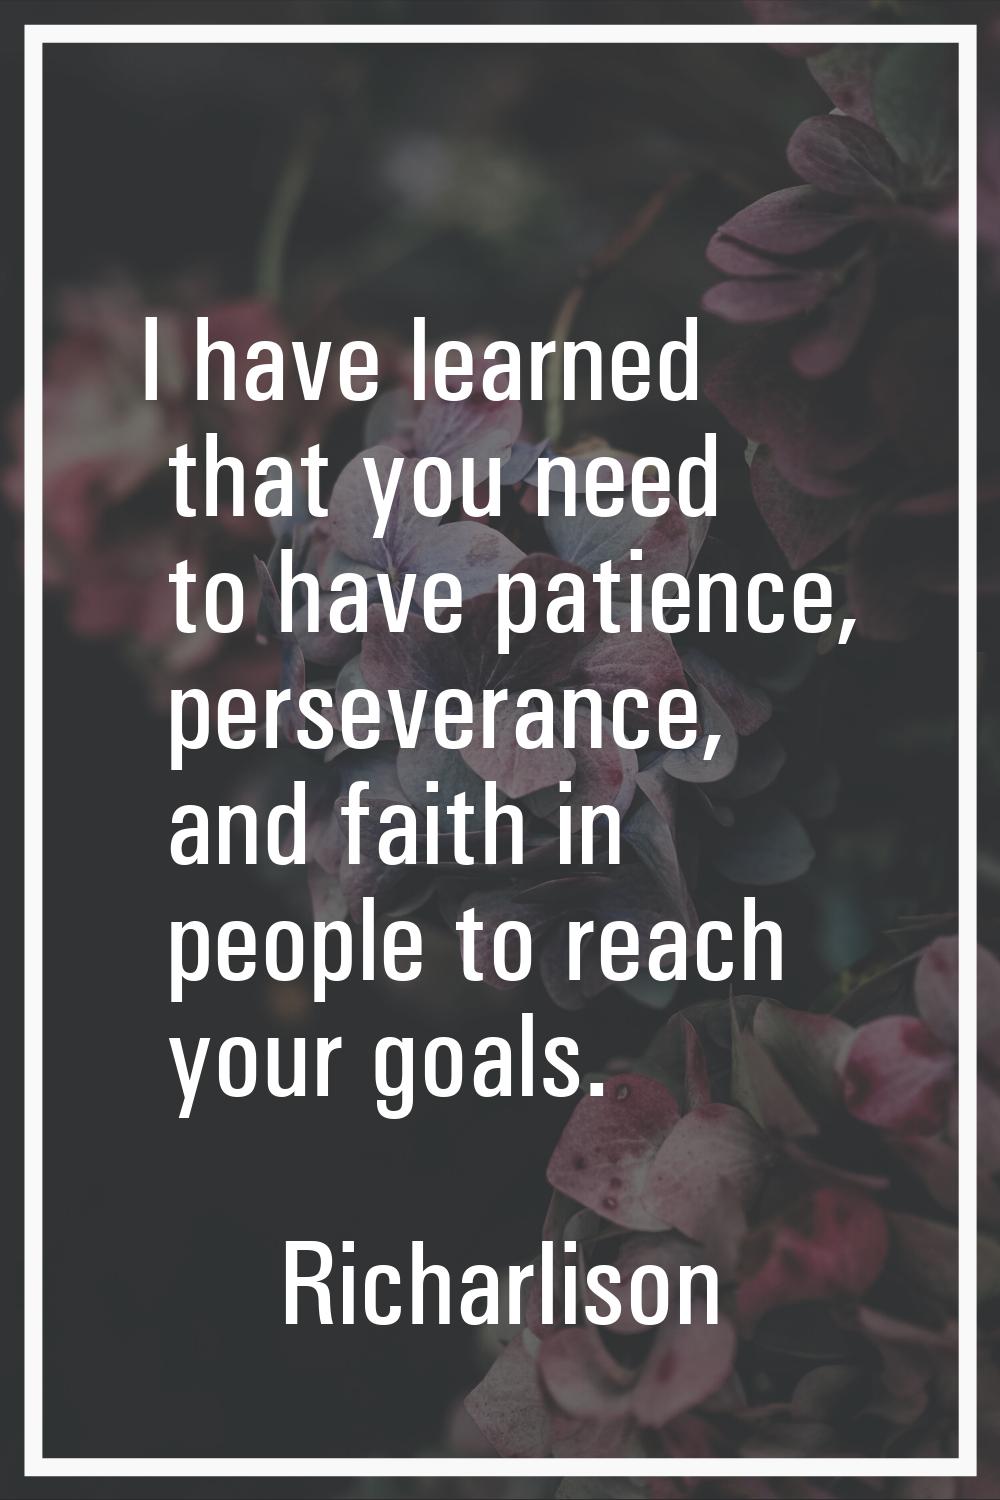 I have learned that you need to have patience, perseverance, and faith in people to reach your goal